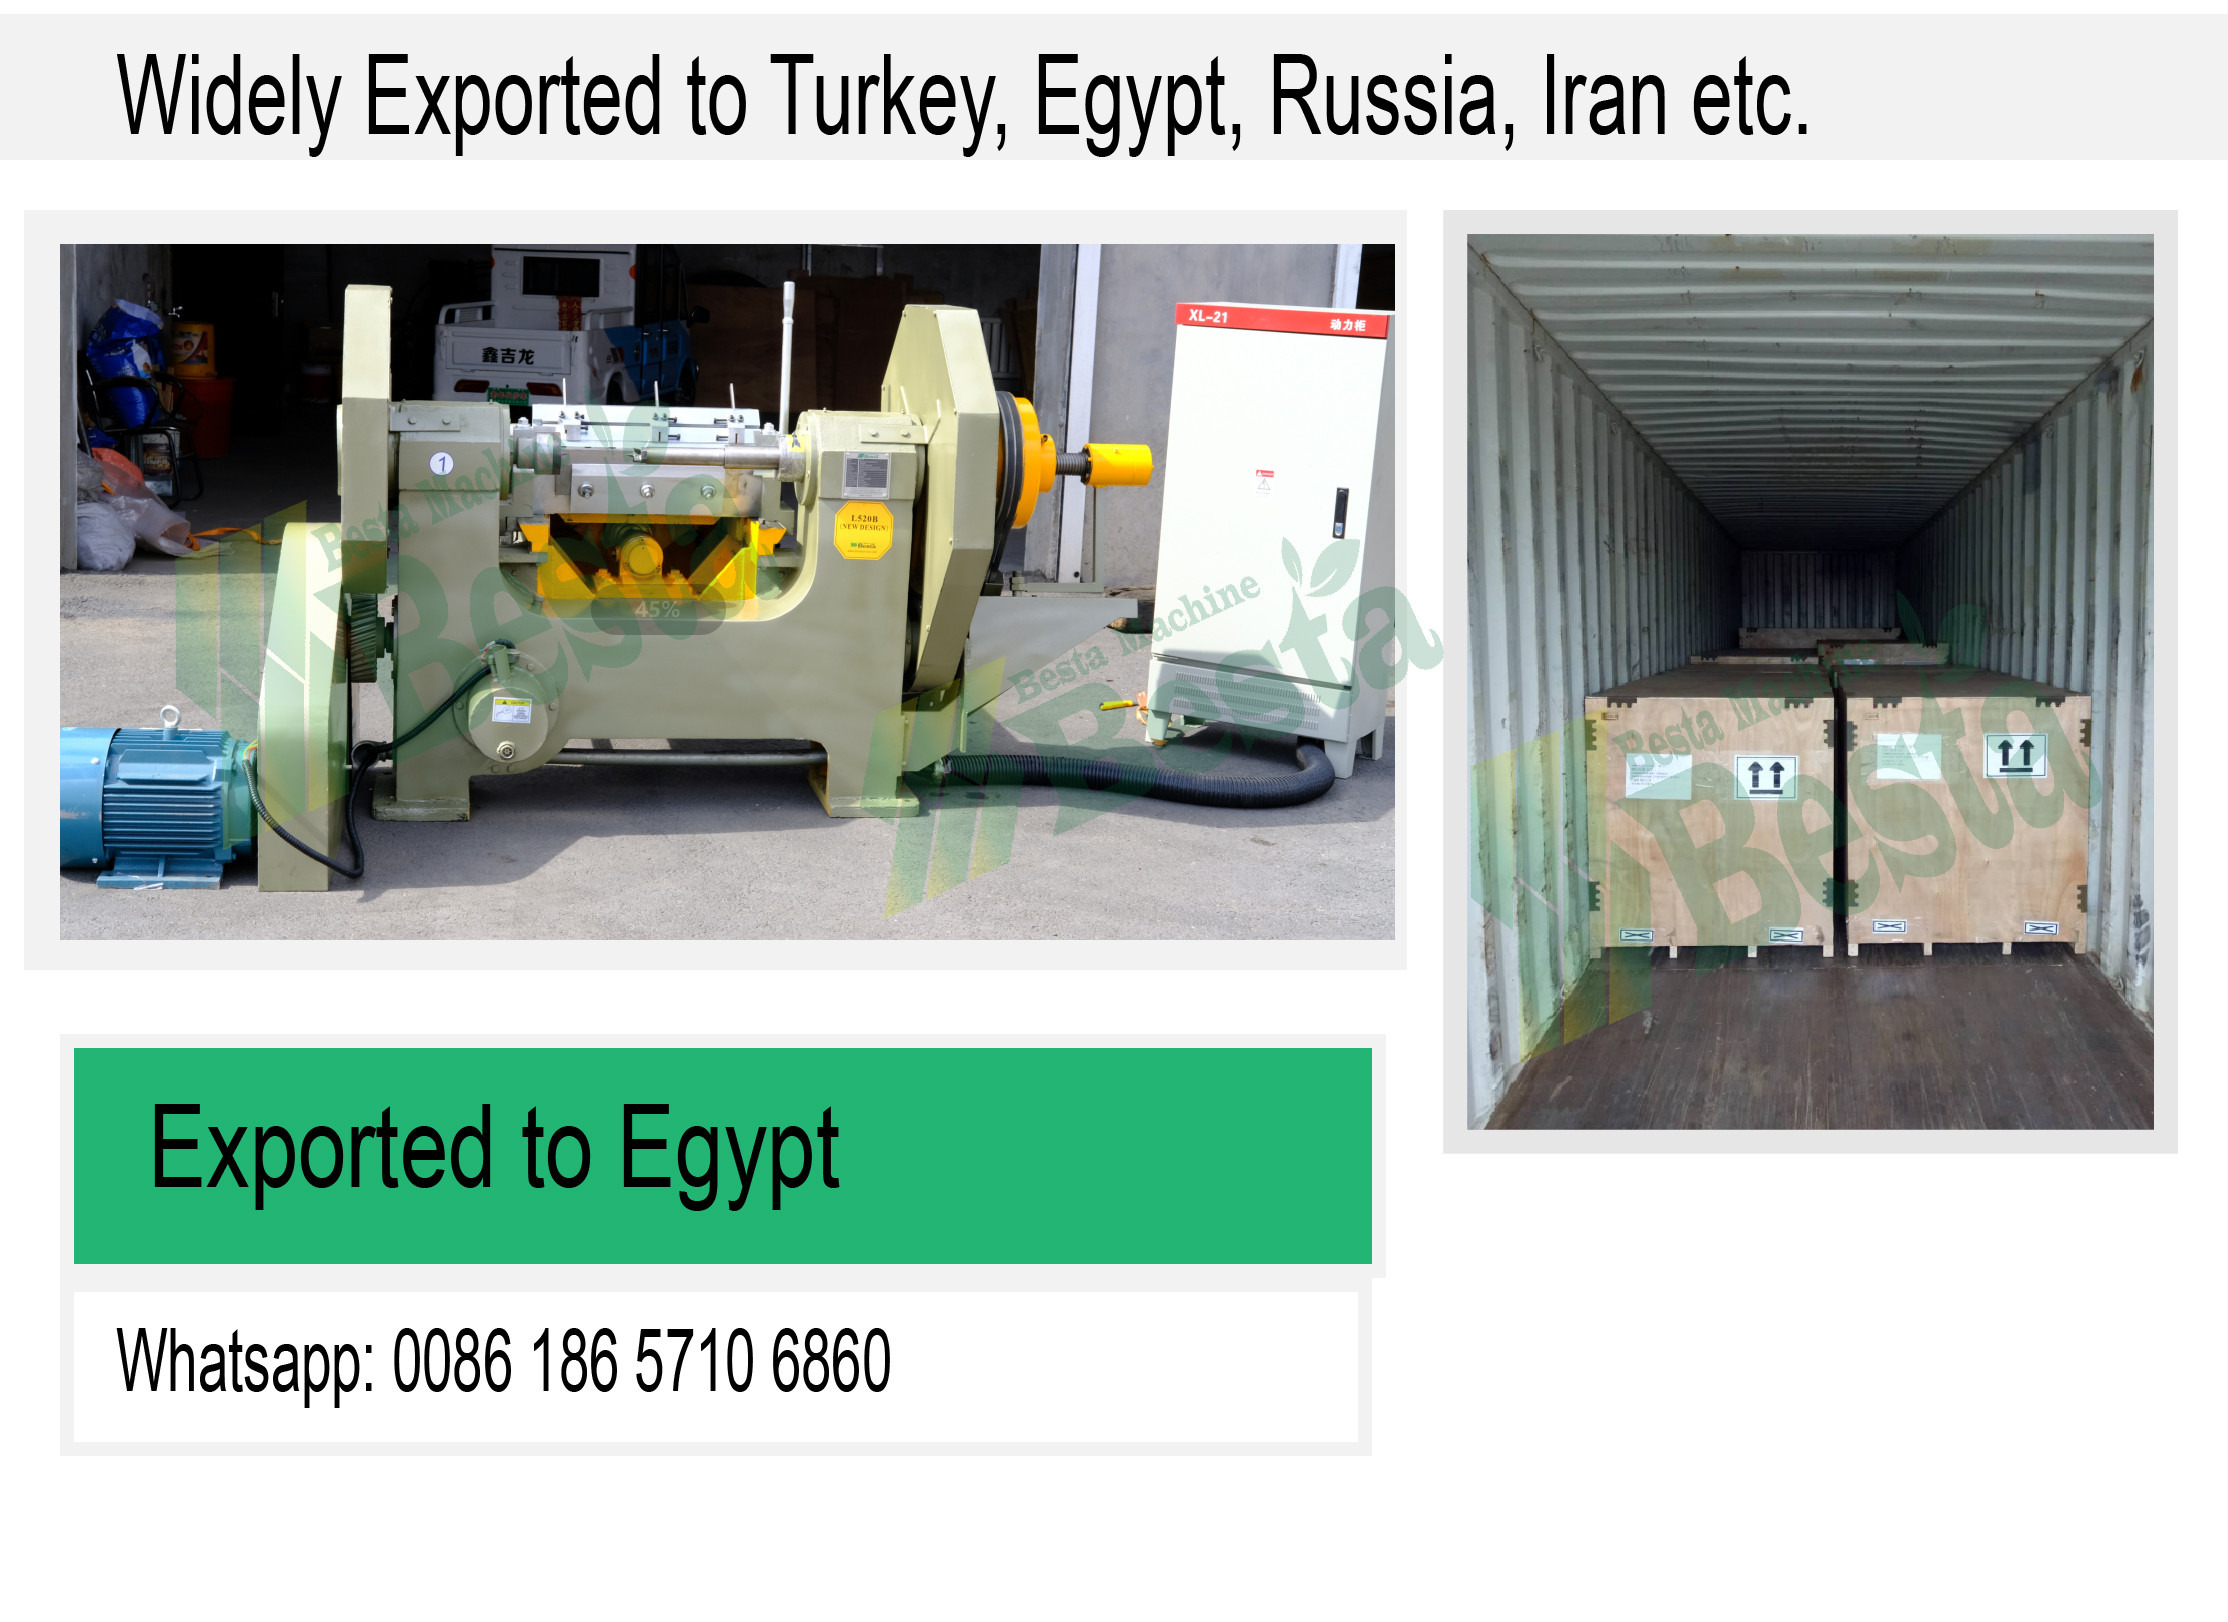 OUR MACHINE WIDELY EXPORTED